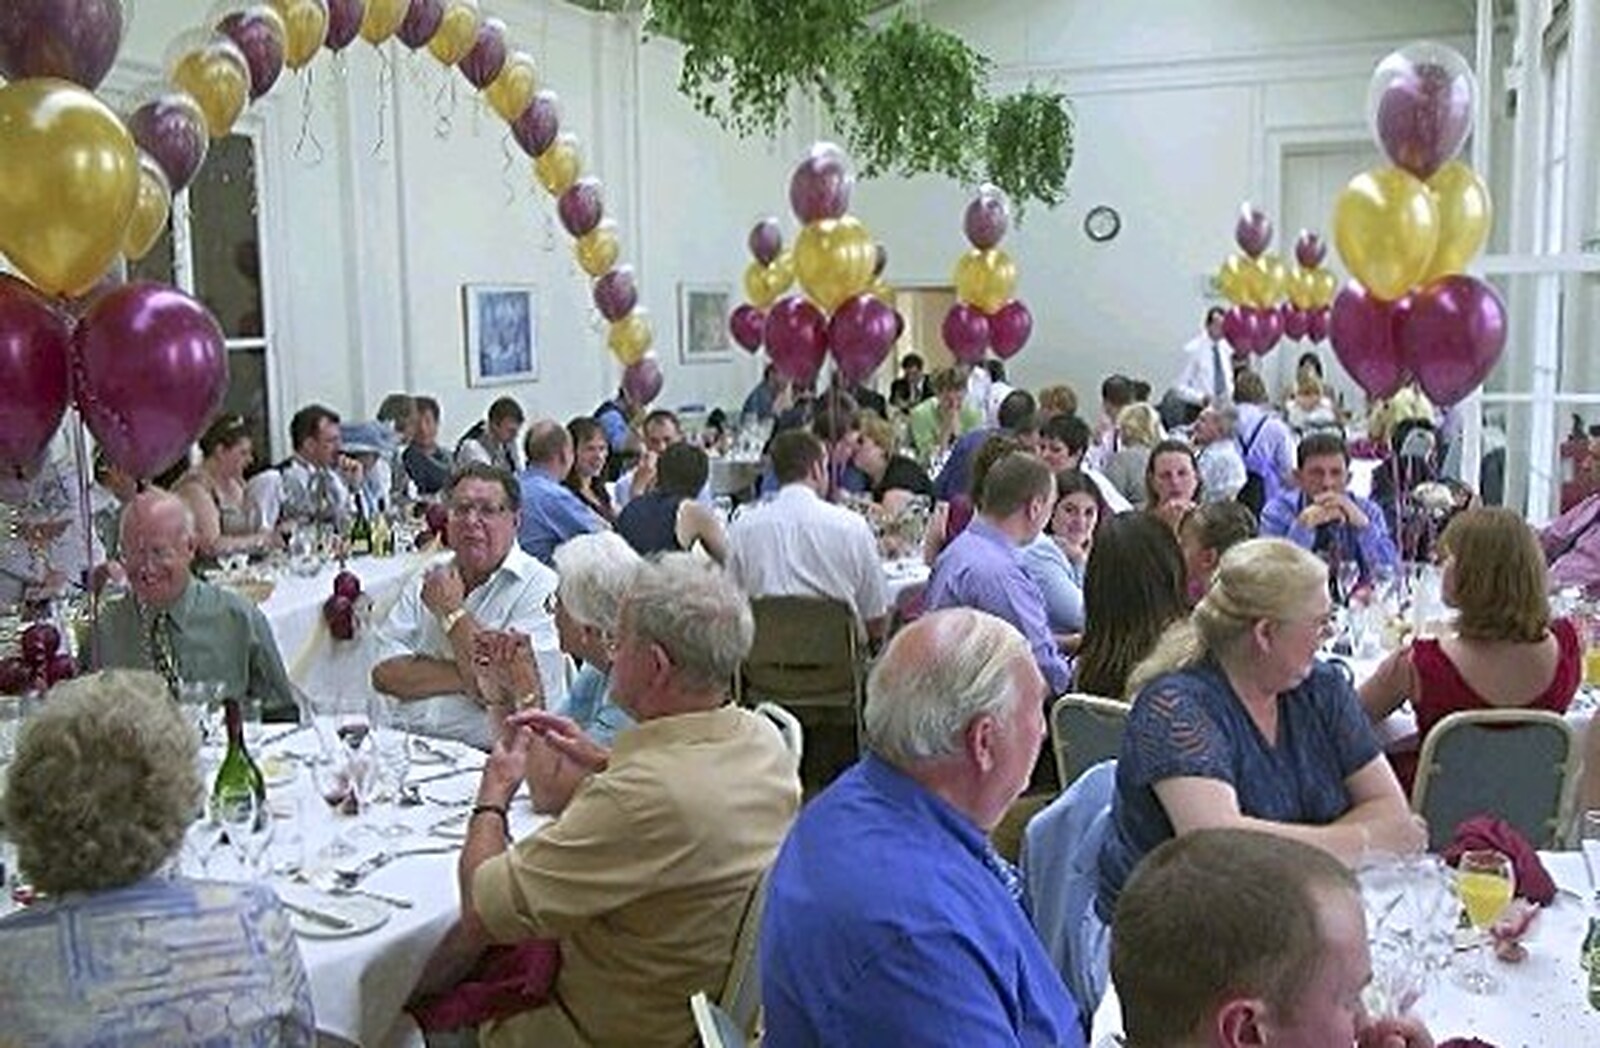 A room full of guests and balloons from Phil and Lisa's Wedding, Woolverston Hall, Ipswich, Suffolk - 1st July 2001